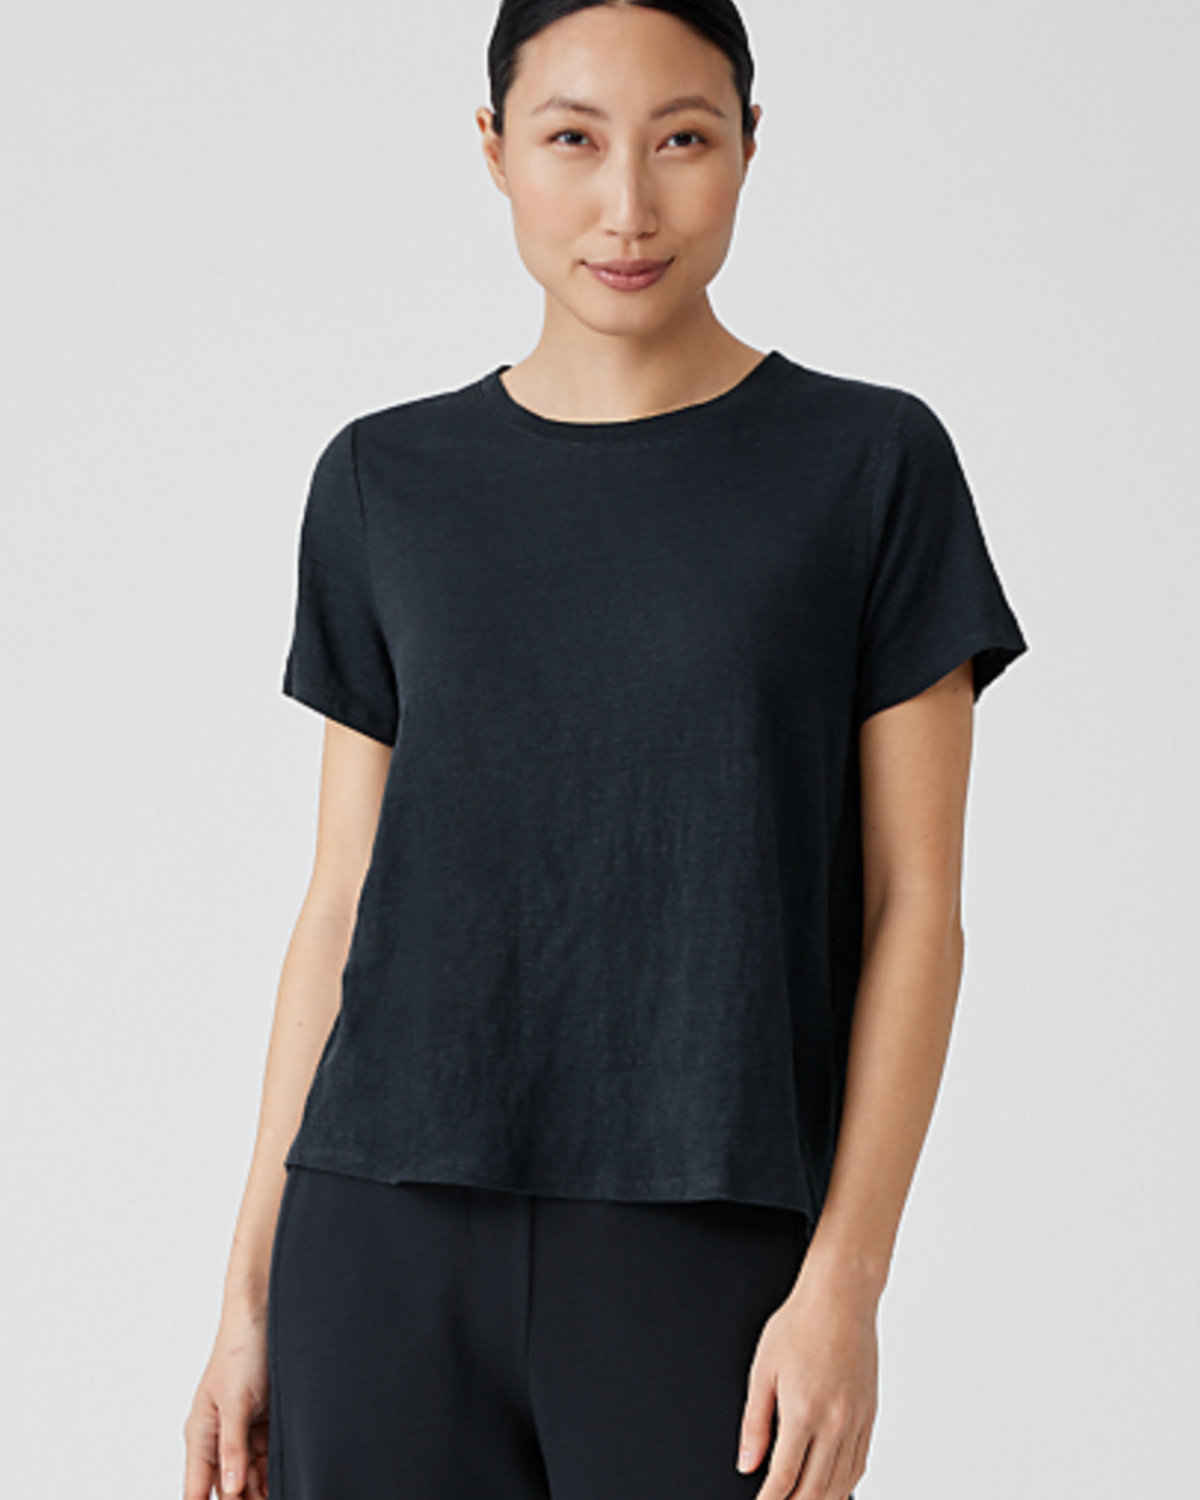 ORGANIC LINEN JERSEY CREW NECK TEE EASY FIT, BASIC LENGTH - AshleyCole Boutique